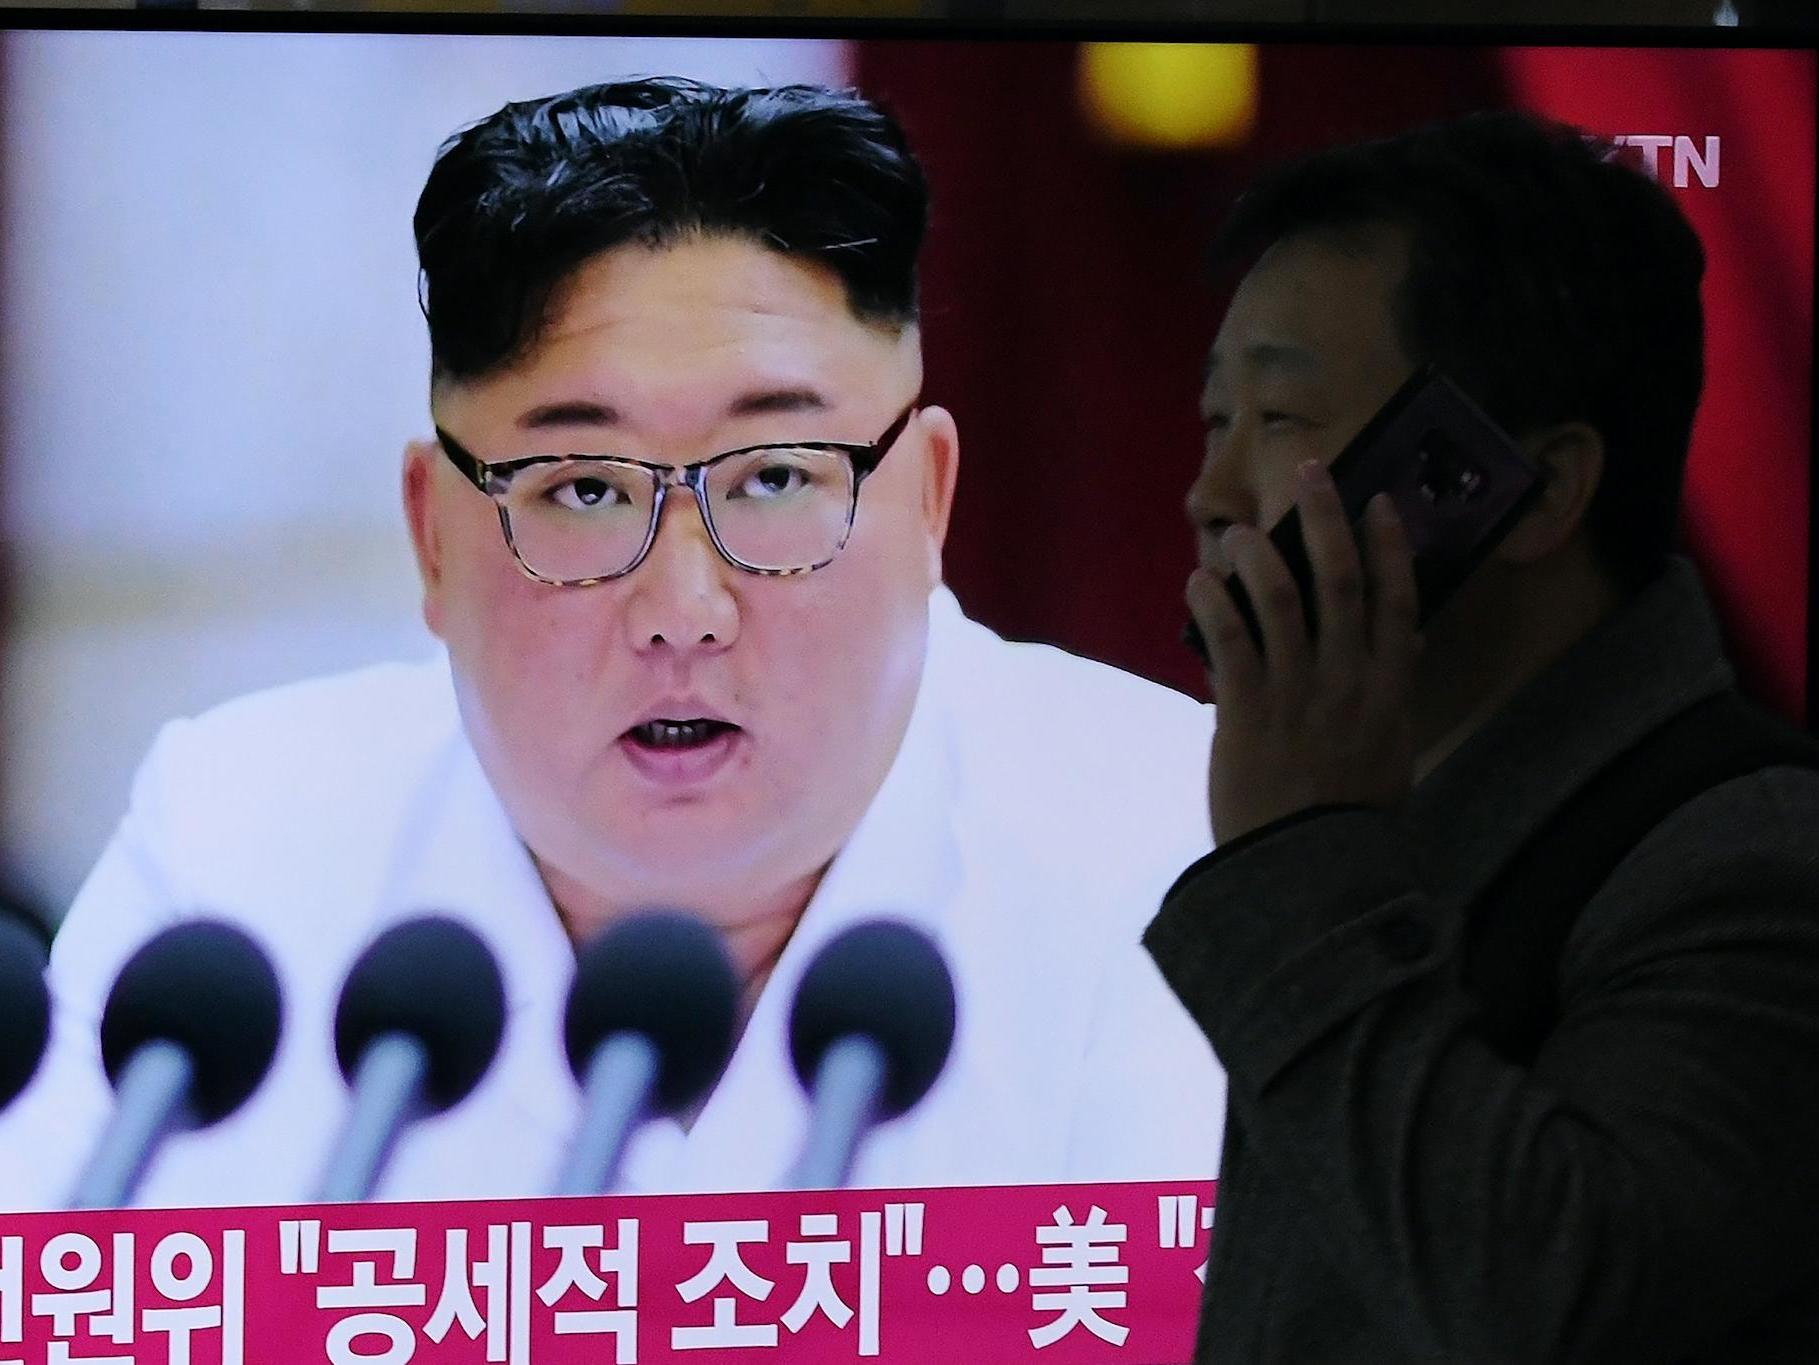 A man walks past a television news program showing the latest pictures of North Korean leader Kim Jong Un, at a railway station in Seoul on December 30, 2019